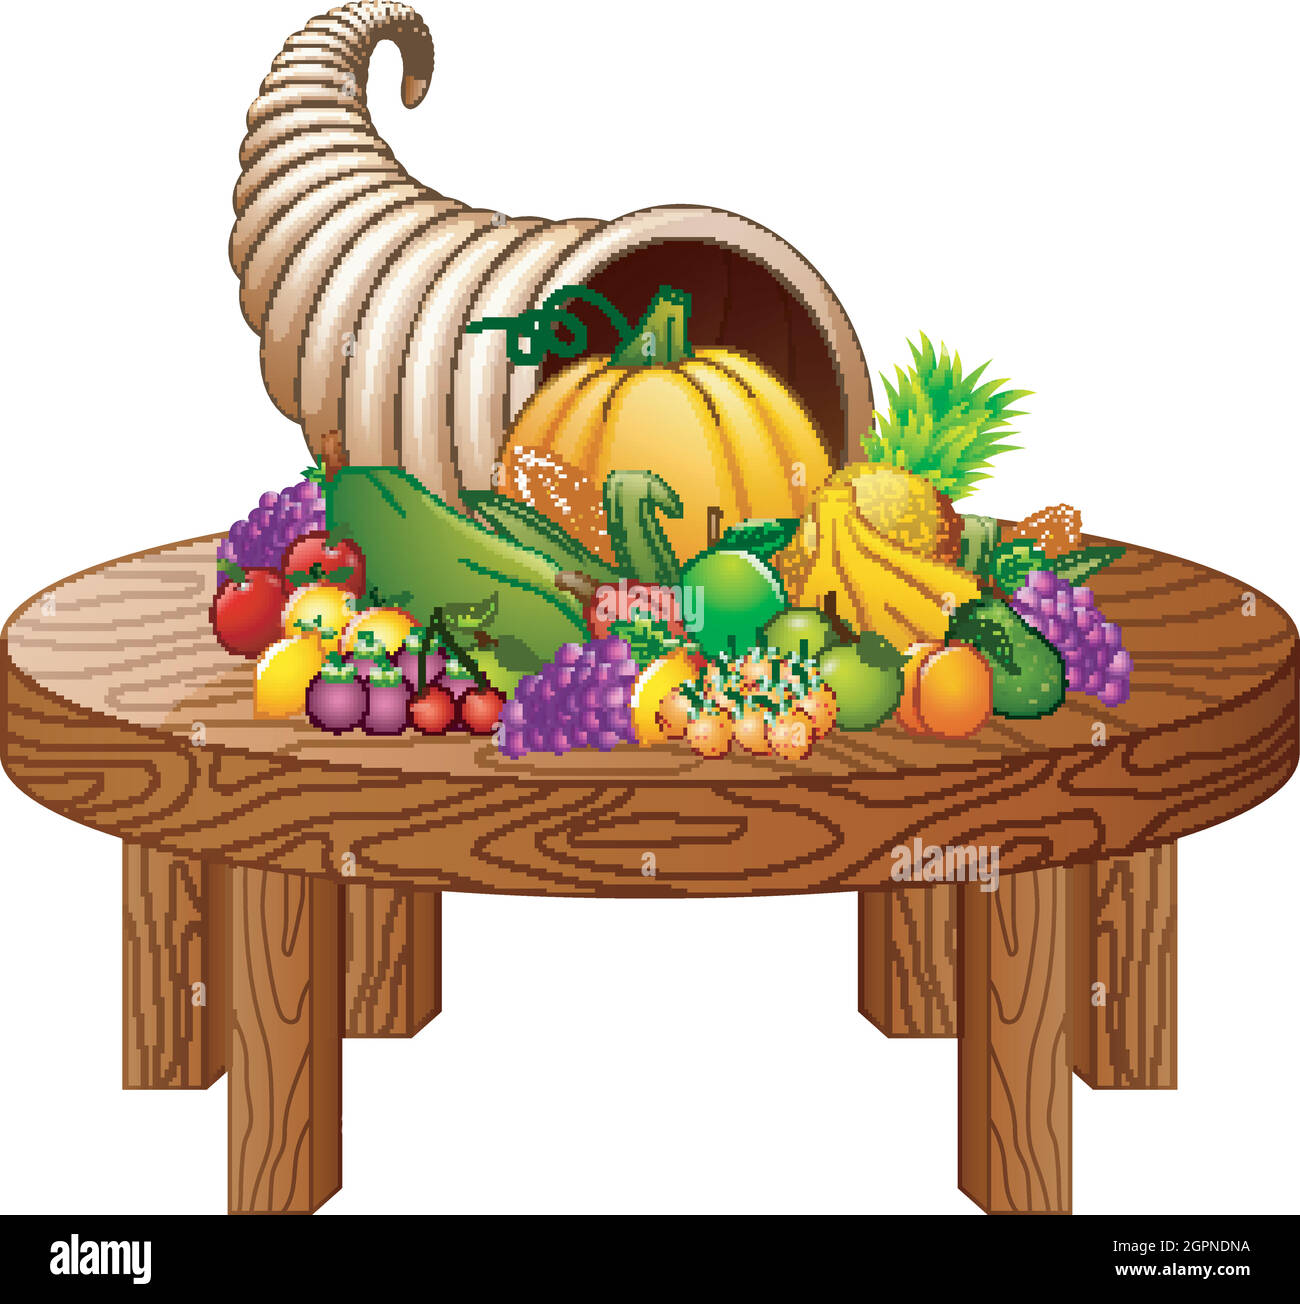 Horn of plenty with vegetables and fruits on round wooden table Stock Vector